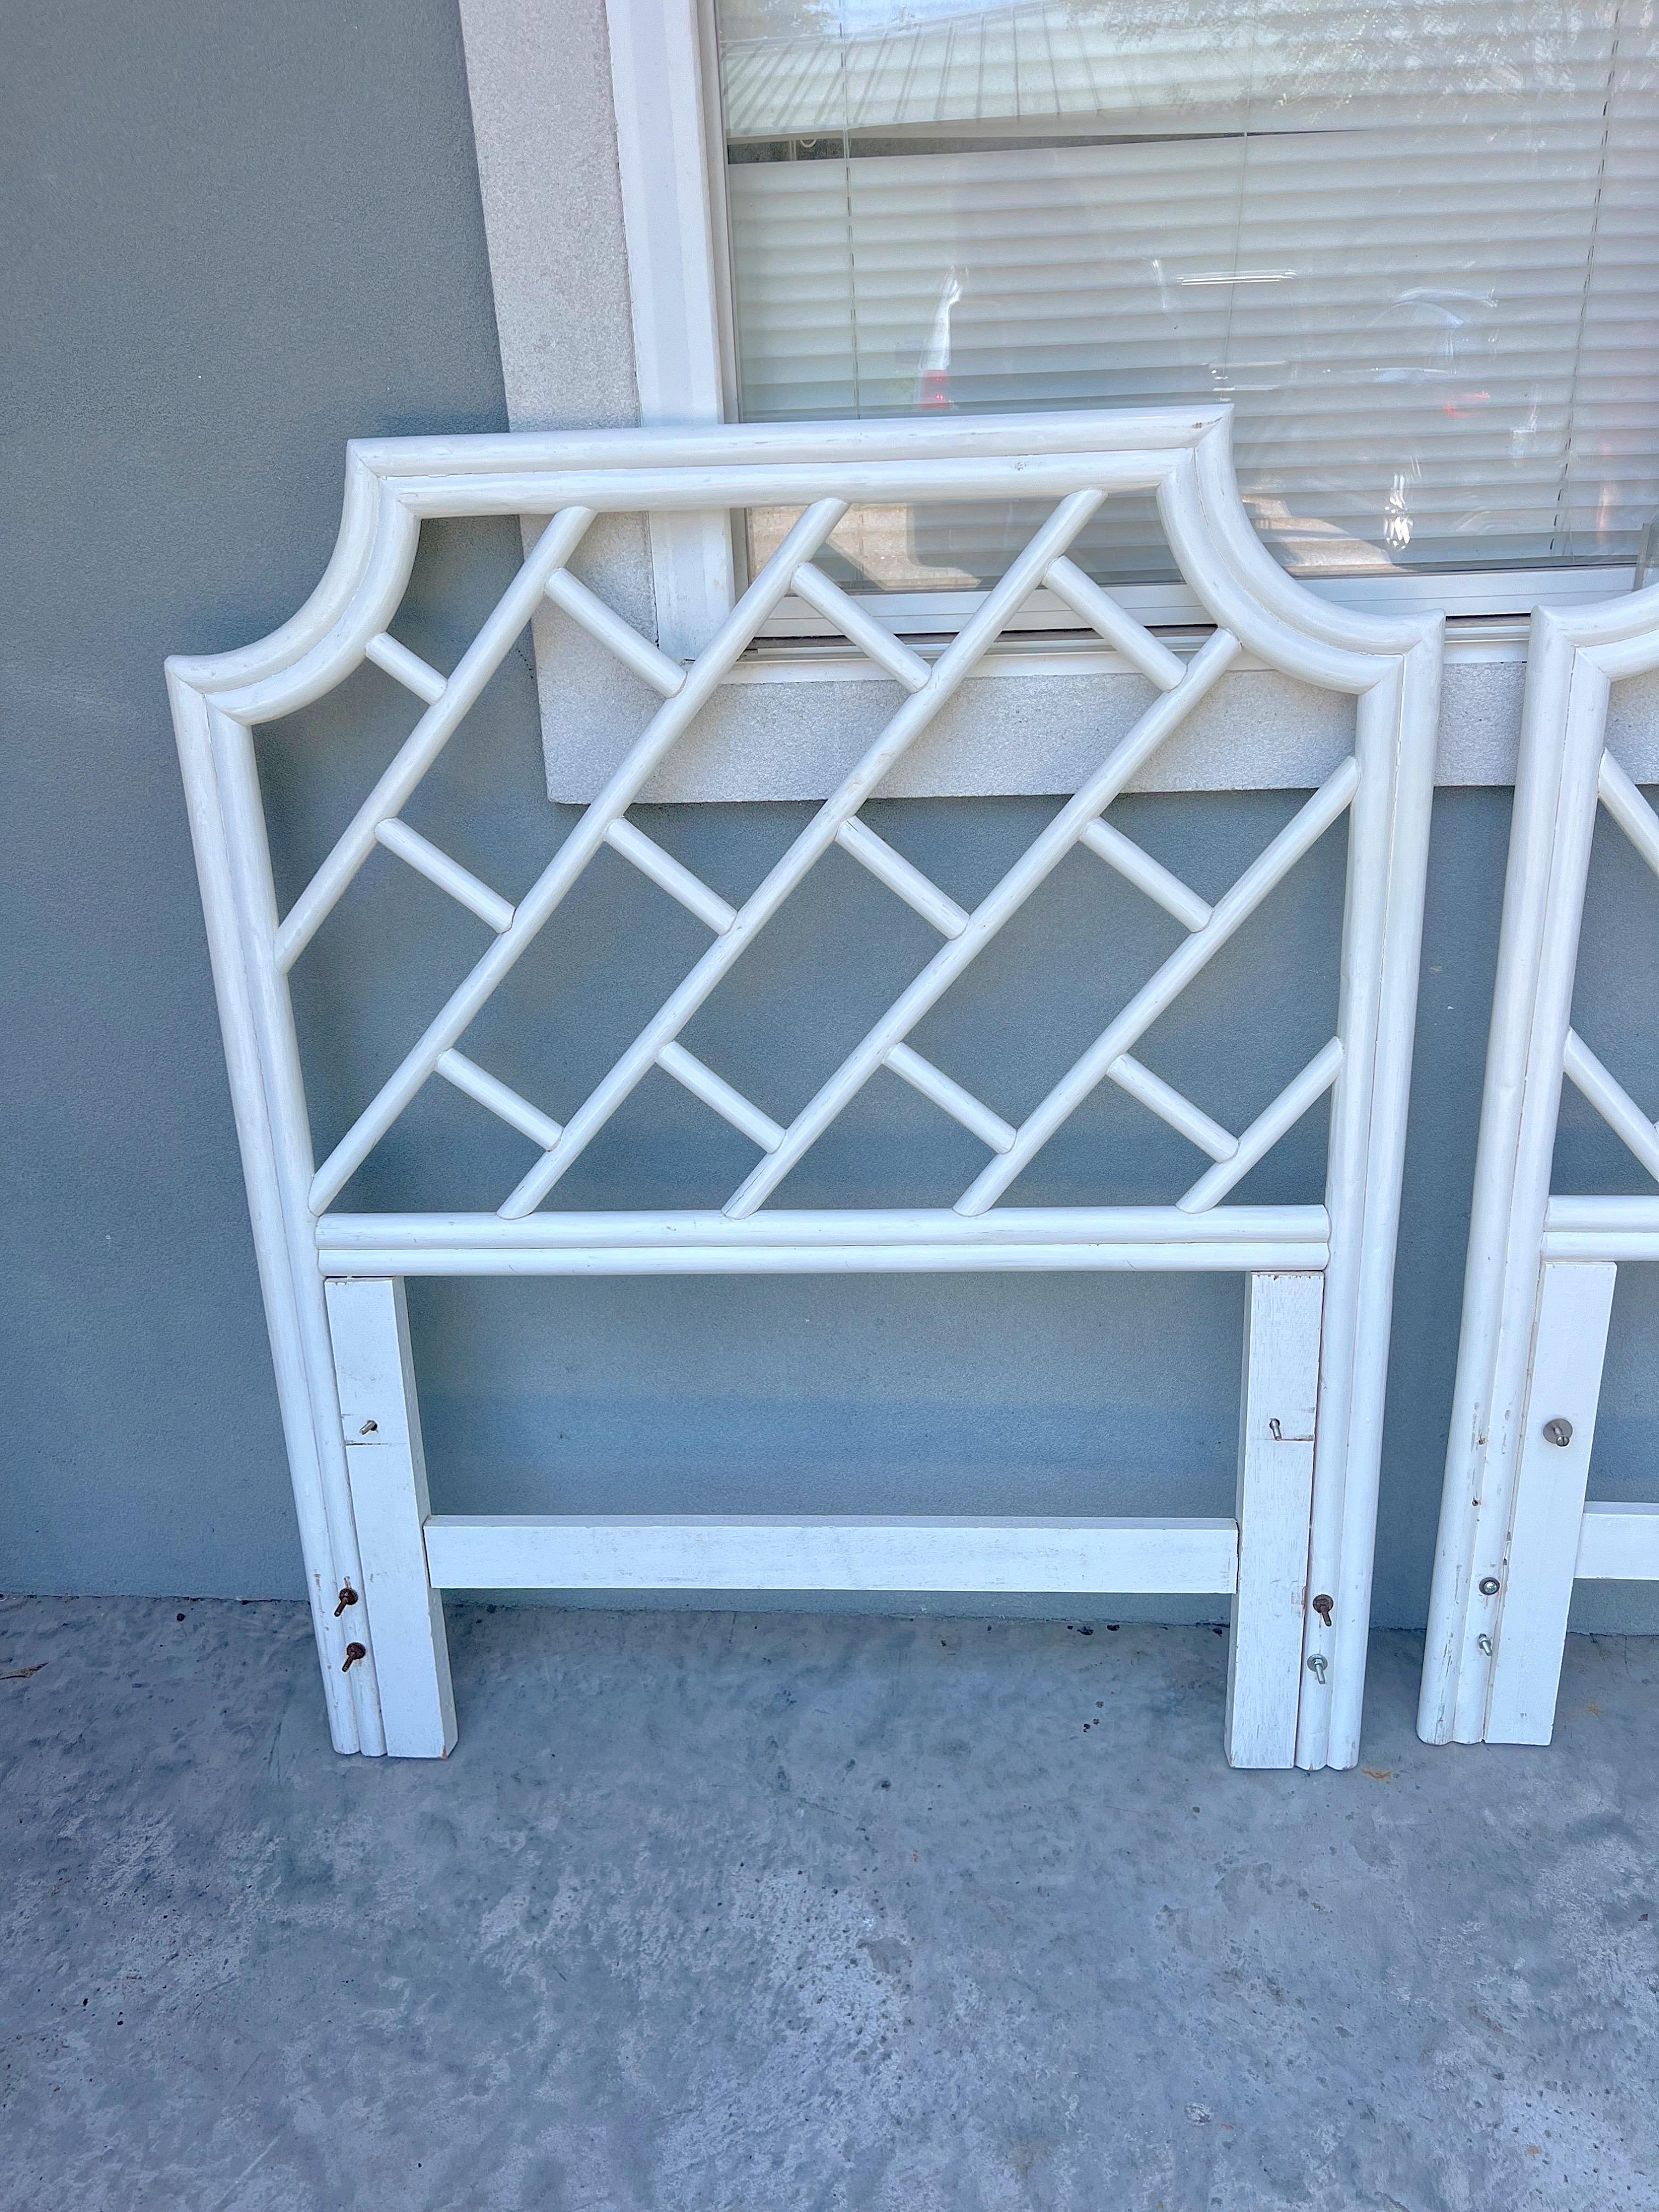 Pair of Asian chinoiserie style rattan headboards in twin size  finished in gloss white. Perfect for a guest room or pushed together for a dramatic king bed. Very good condition with minor imperfections consistent with age. Price is for the